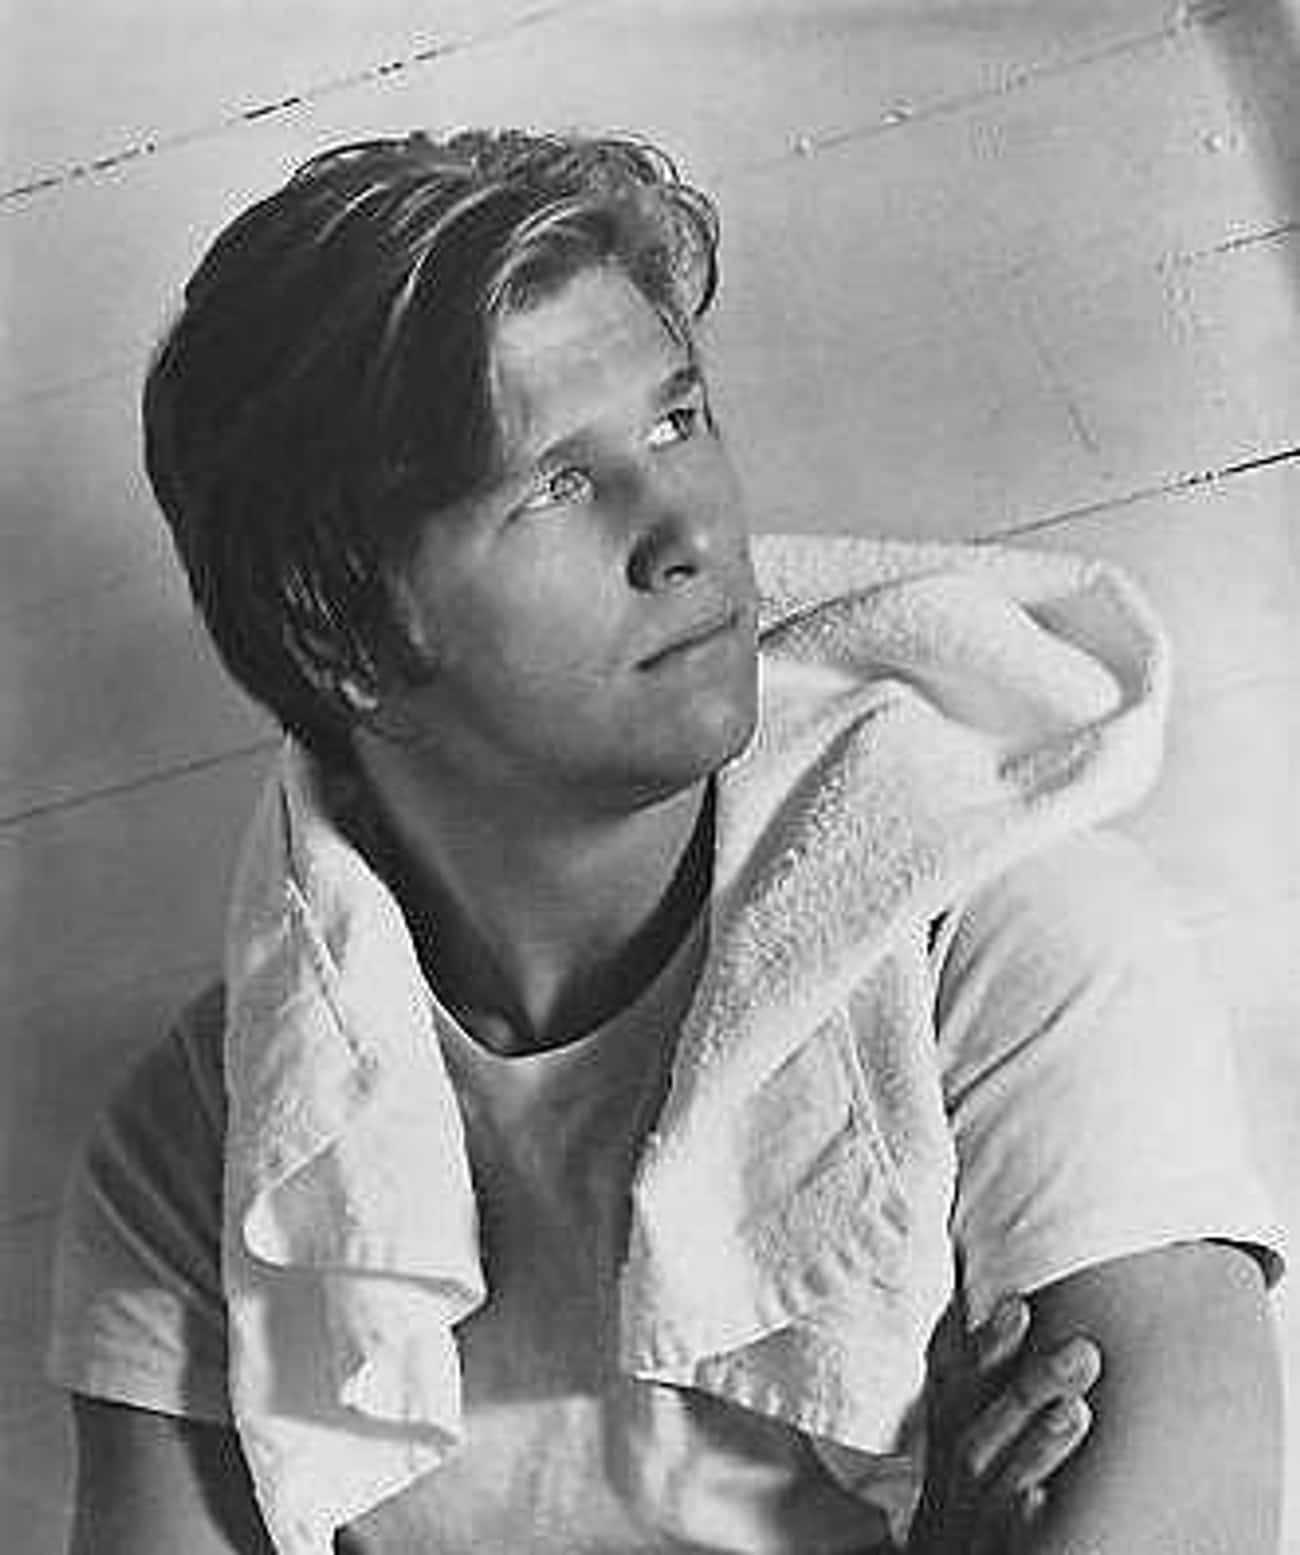 Young Jeff Bridges in a White T-Shirt Side Profile Shot